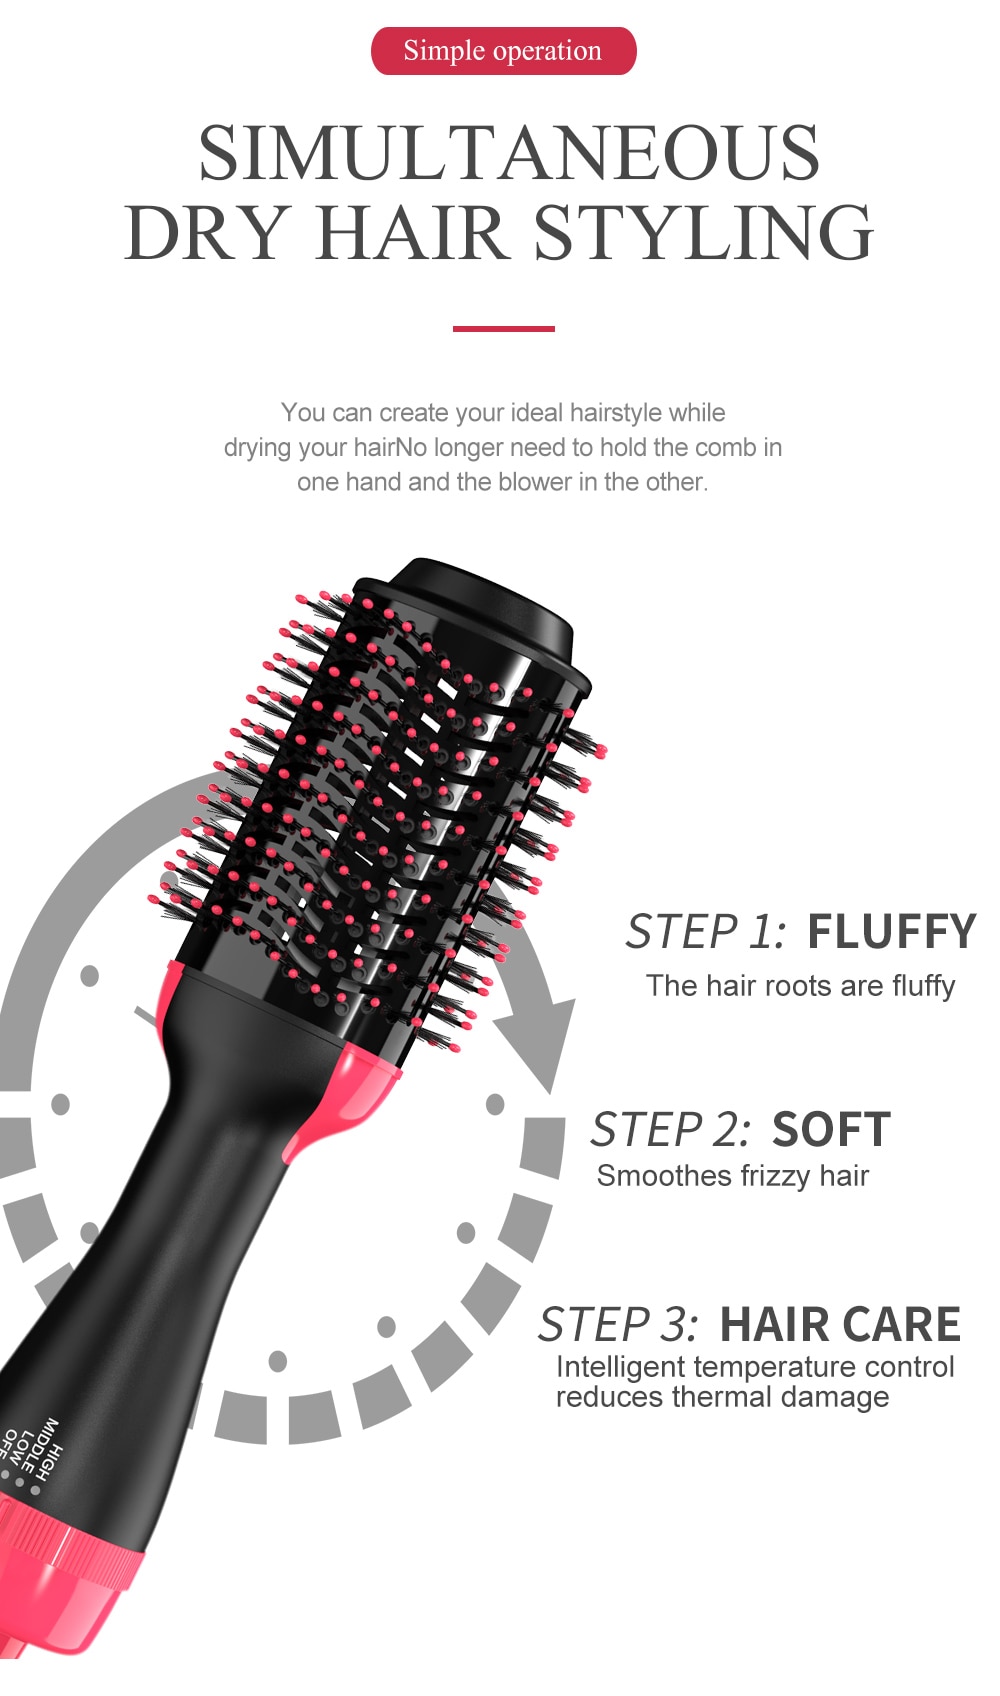 Lisapro Hot Air Brush 2 In 1 Hair Dryer Hair Straightener Curler Comb Electric Blow Dryer With Comb Hair Brush Roller Styler